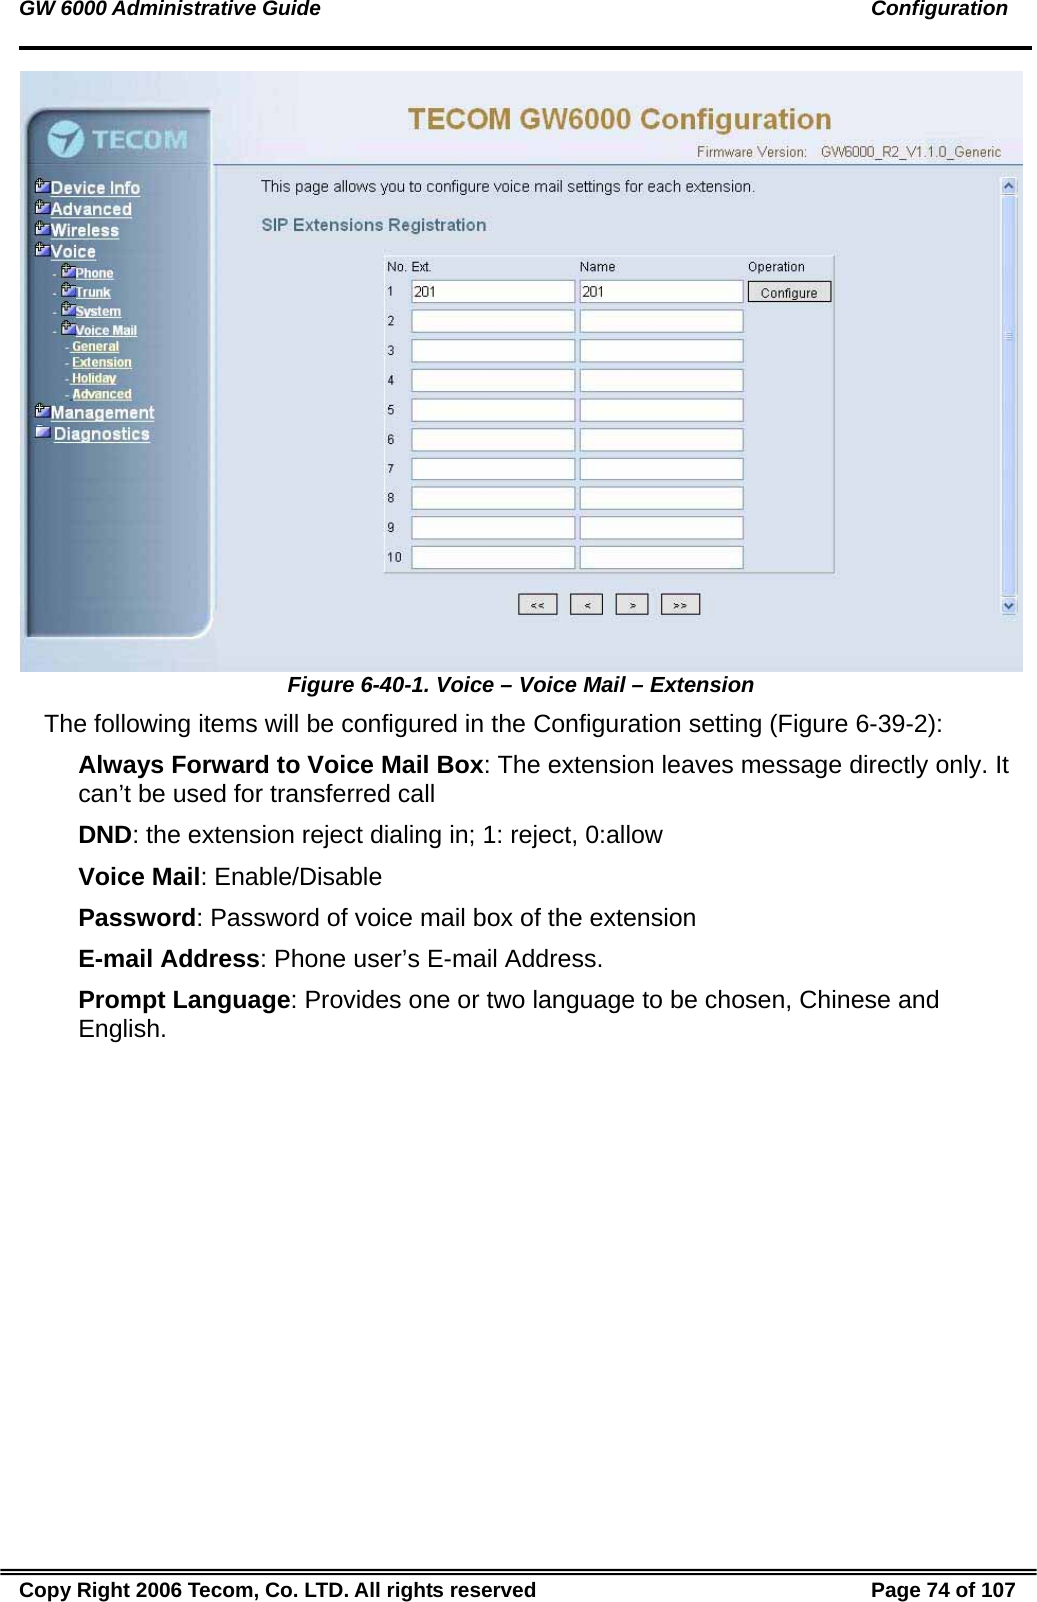 GW 6000 Administrative Guide                                                                                               Configuration  Figure 6-40-1. Voice – Voice Mail – Extension The following items will be configured in the Configuration setting (Figure 6-39-2): Always Forward to Voice Mail Box: The extension leaves message directly only. It can’t be used for transferred call DND: the extension reject dialing in; 1: reject, 0:allow Voice Mail: Enable/Disable Password: Password of voice mail box of the extension E-mail Address: Phone user’s E-mail Address. Prompt Language: Provides one or two language to be chosen, Chinese and English. Copy Right 2006 Tecom, Co. LTD. All rights reserved  Page 74 of 107 